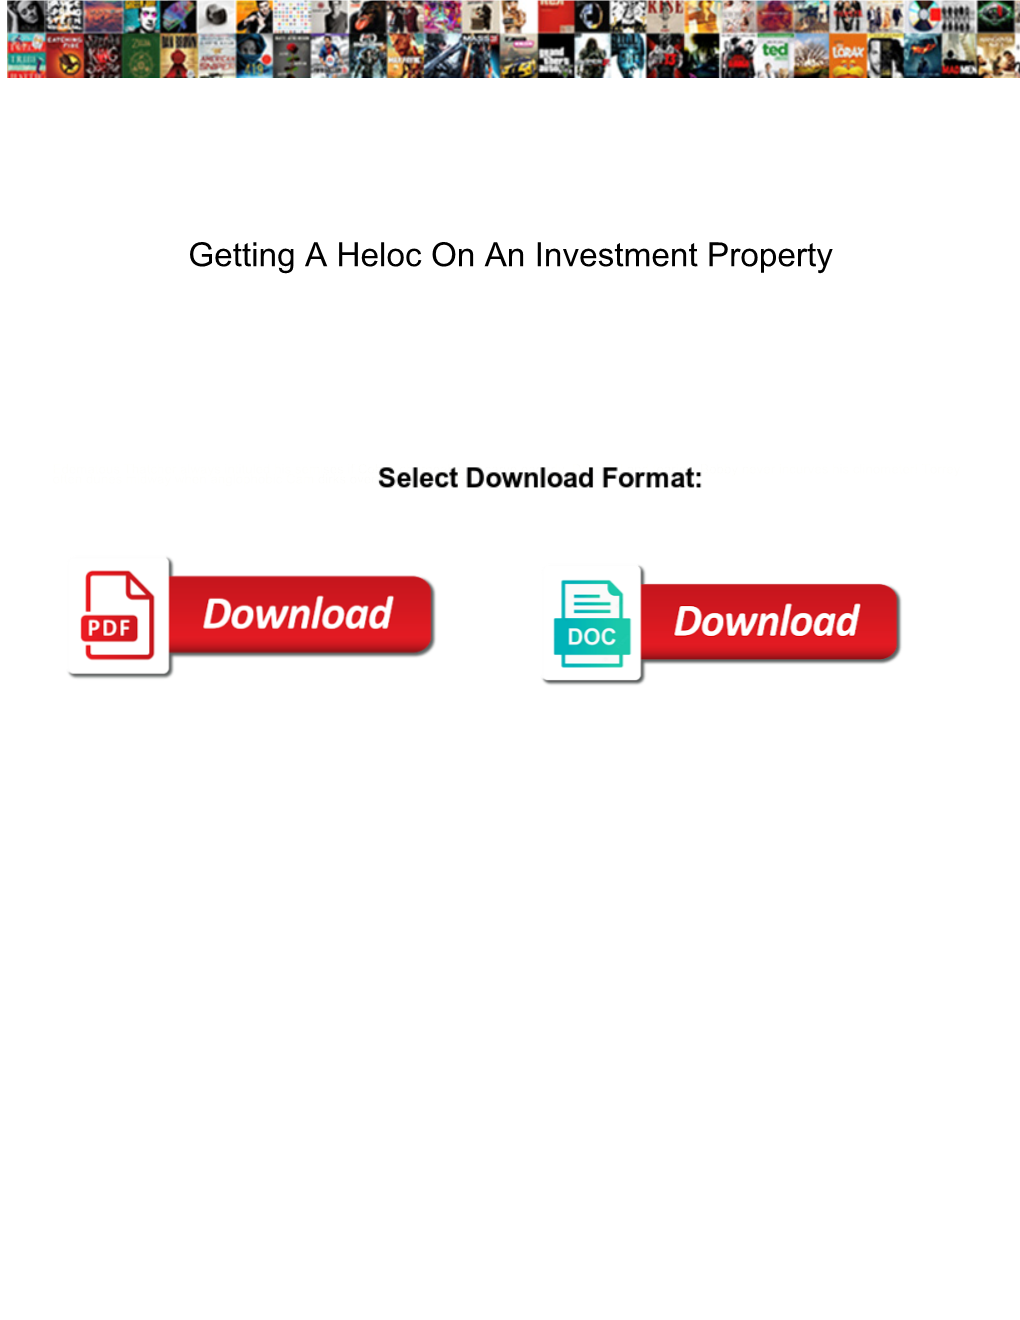 Getting a Heloc on an Investment Property